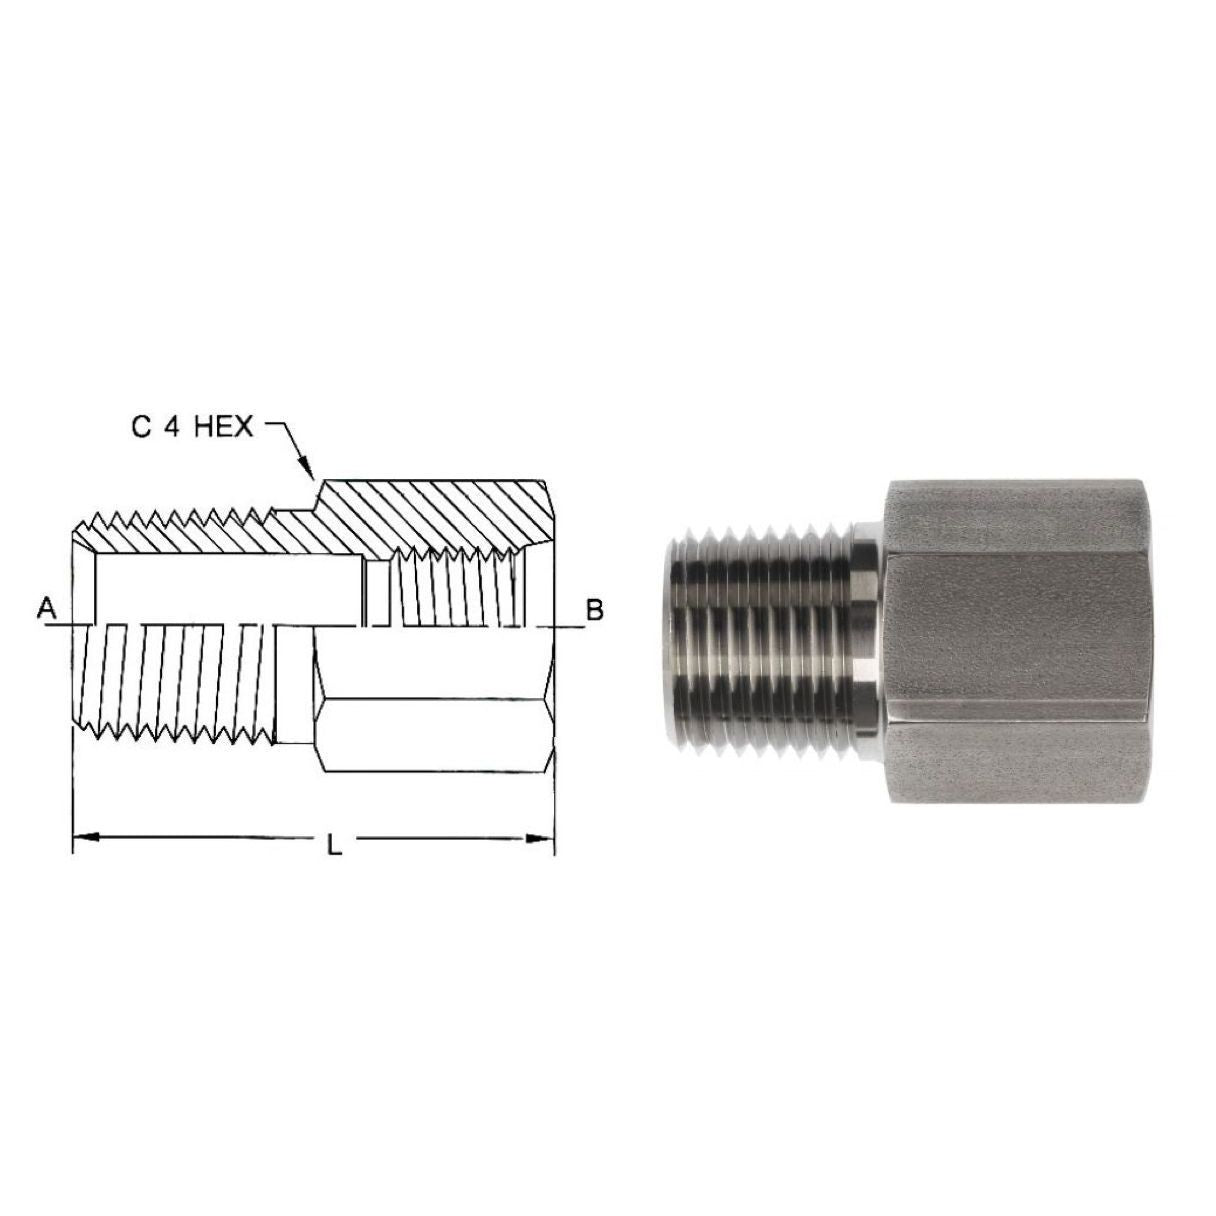 6404-05-02 : OneHydraulics Adapter, Straight, 0.3125 (5/16") Female ORB x 0.125 (1/8") Male, Steel, 6000psi